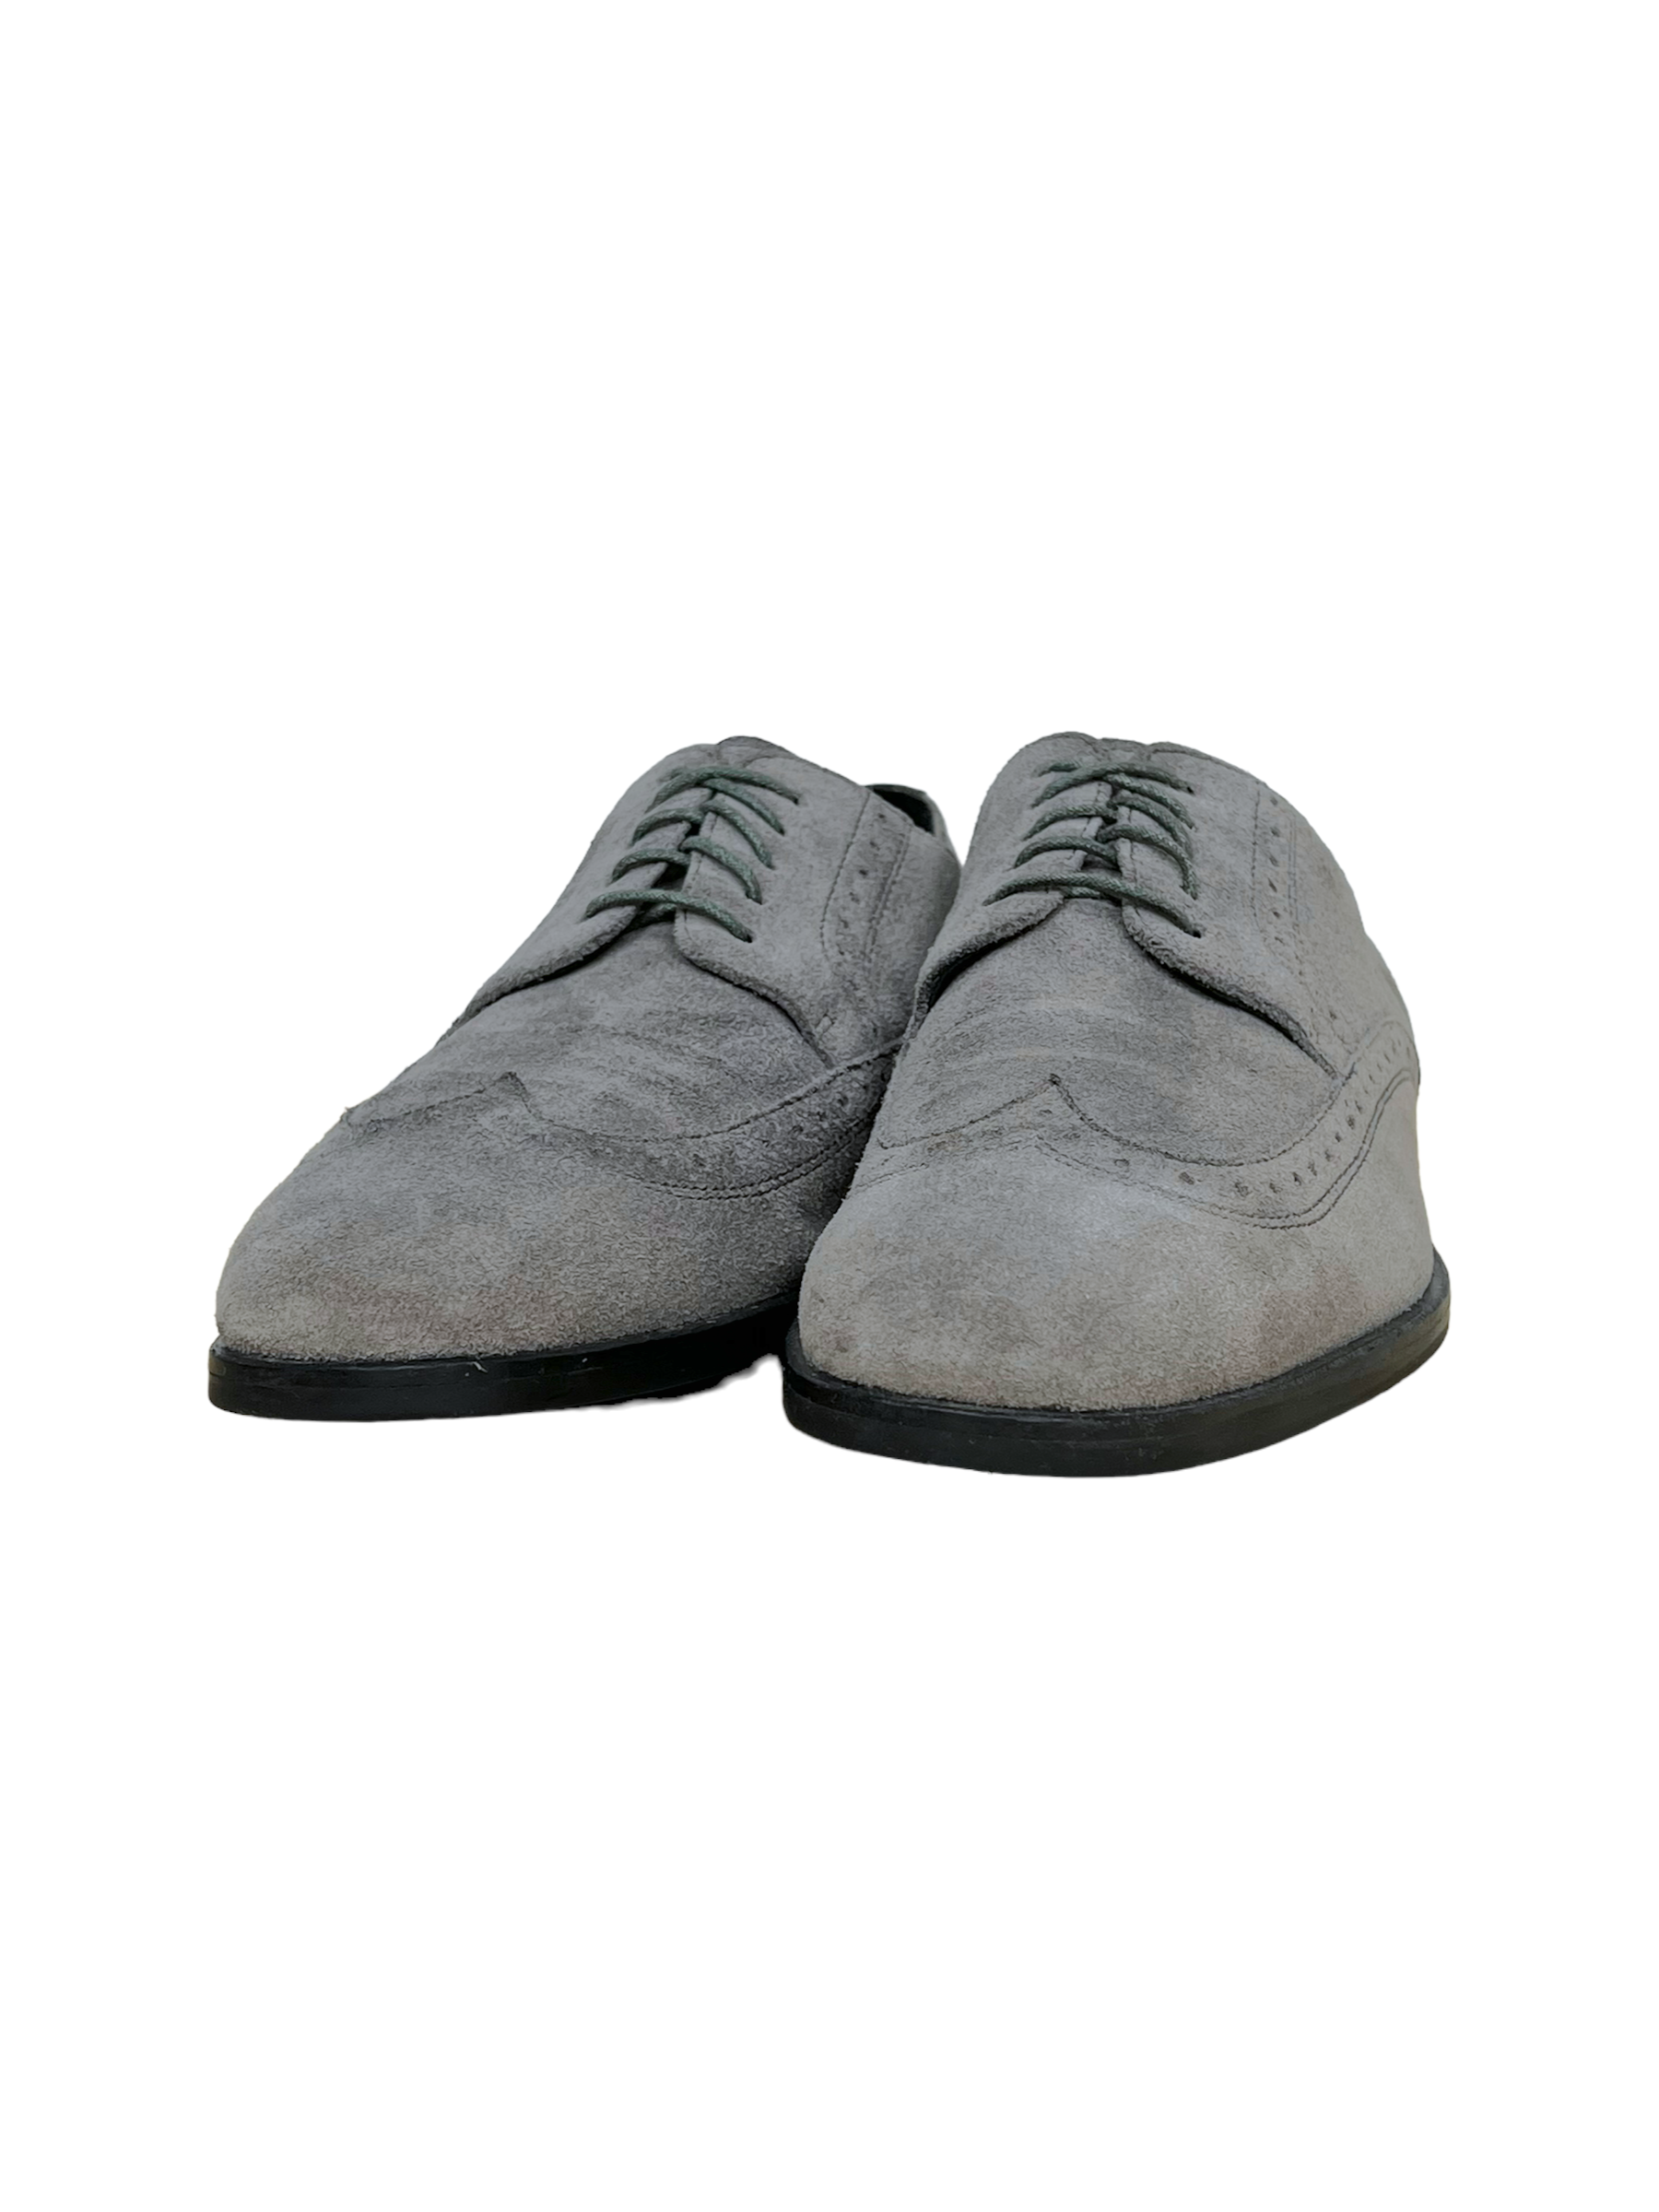 Hugo Boss Grey Suede Matano Wingtip Derby Shoes - Genuine Design Luxury Consignment for Men. New & Pre-Owned Clothing, Shoes, & Accessories. Calgary, Canada